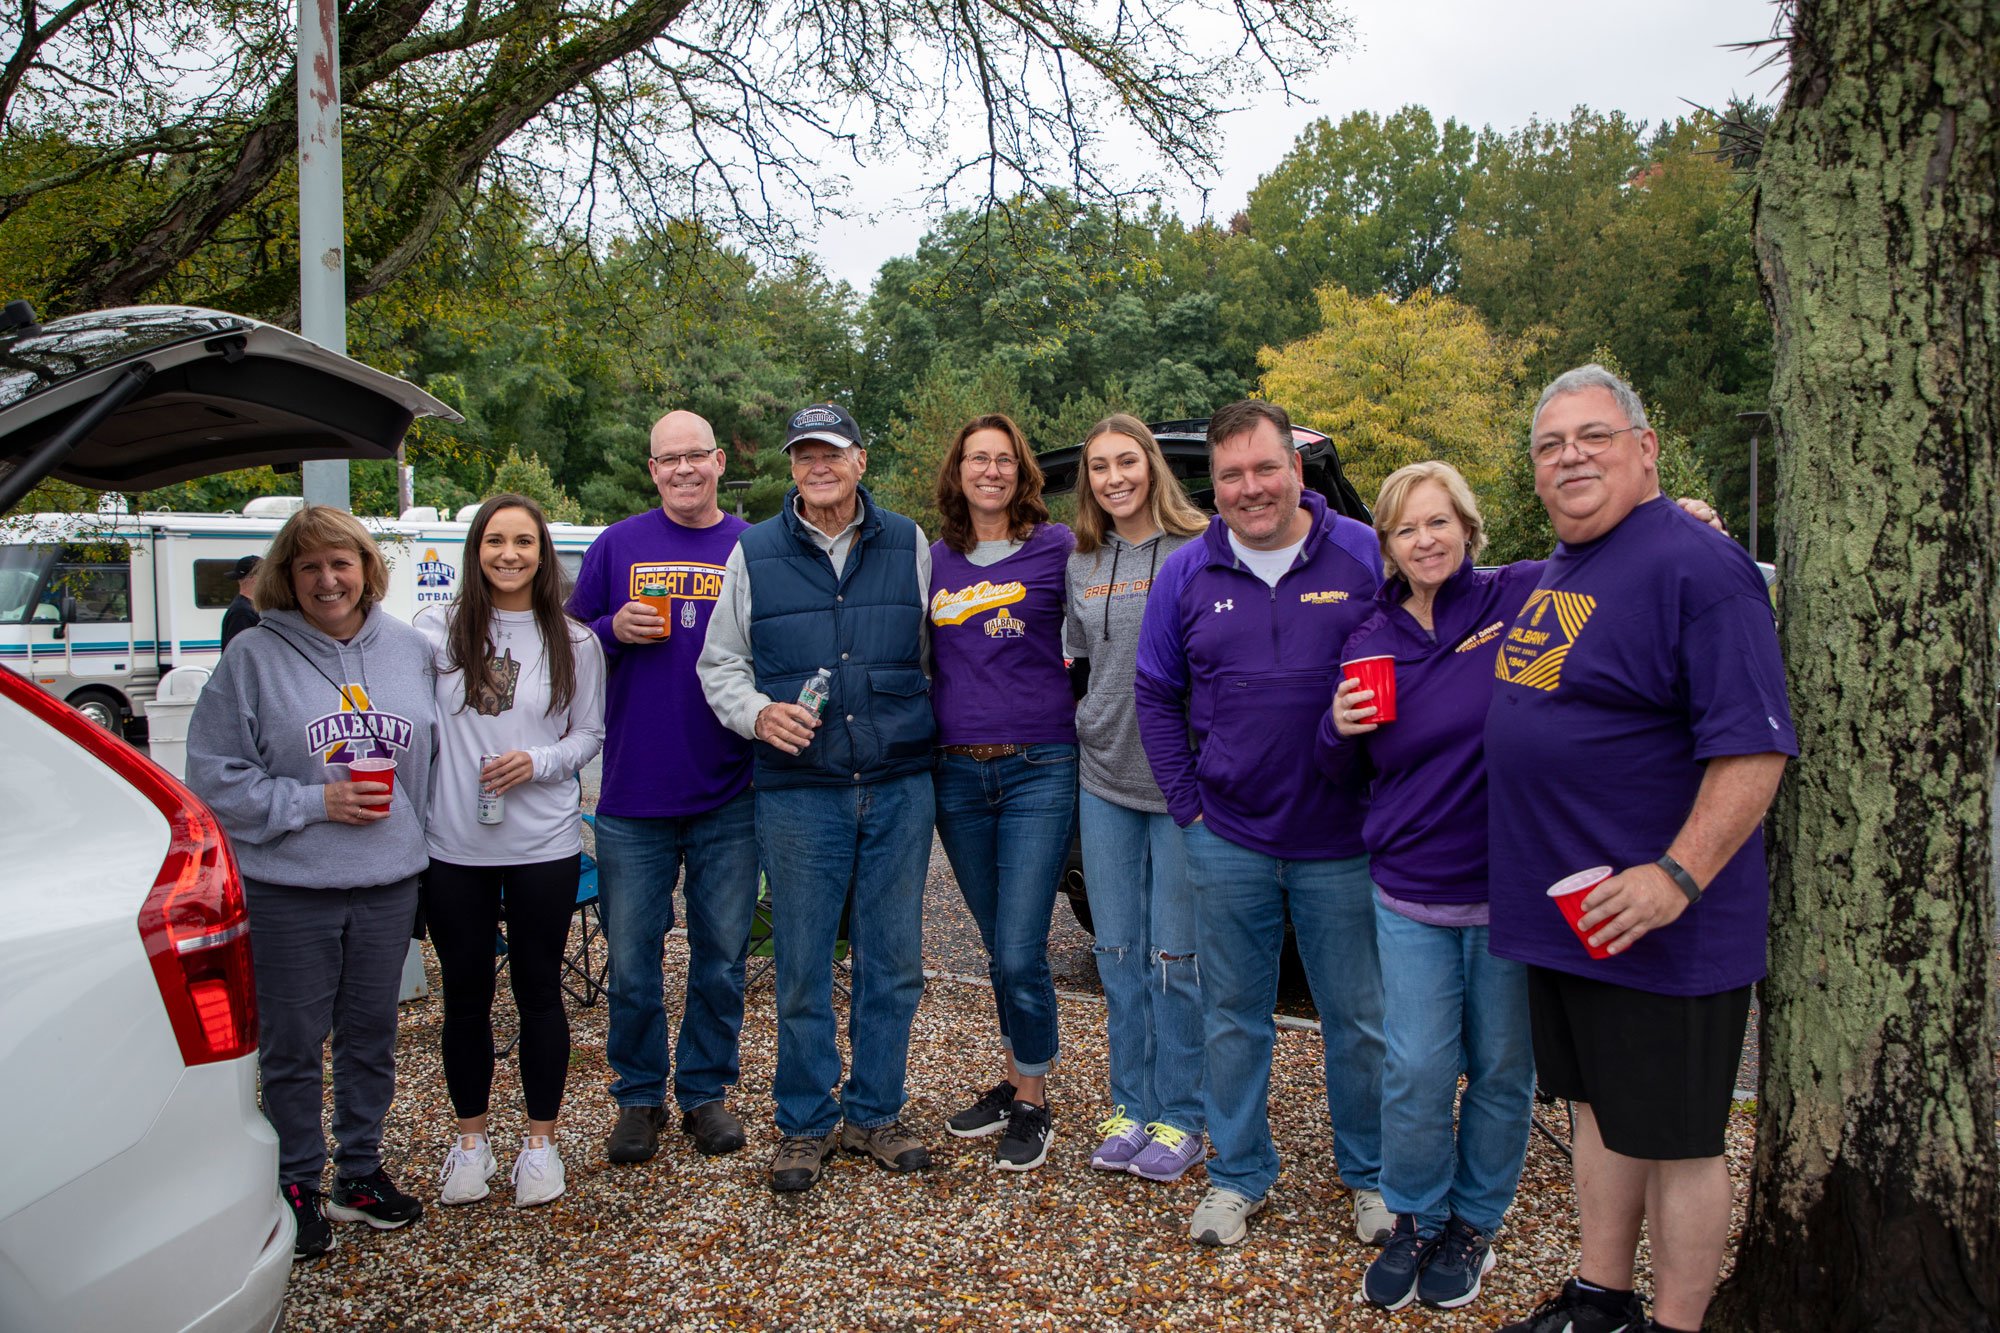 Nine adults, most of whom are wearing UAlbany gear, smile as they pose for a photo while tailgating.